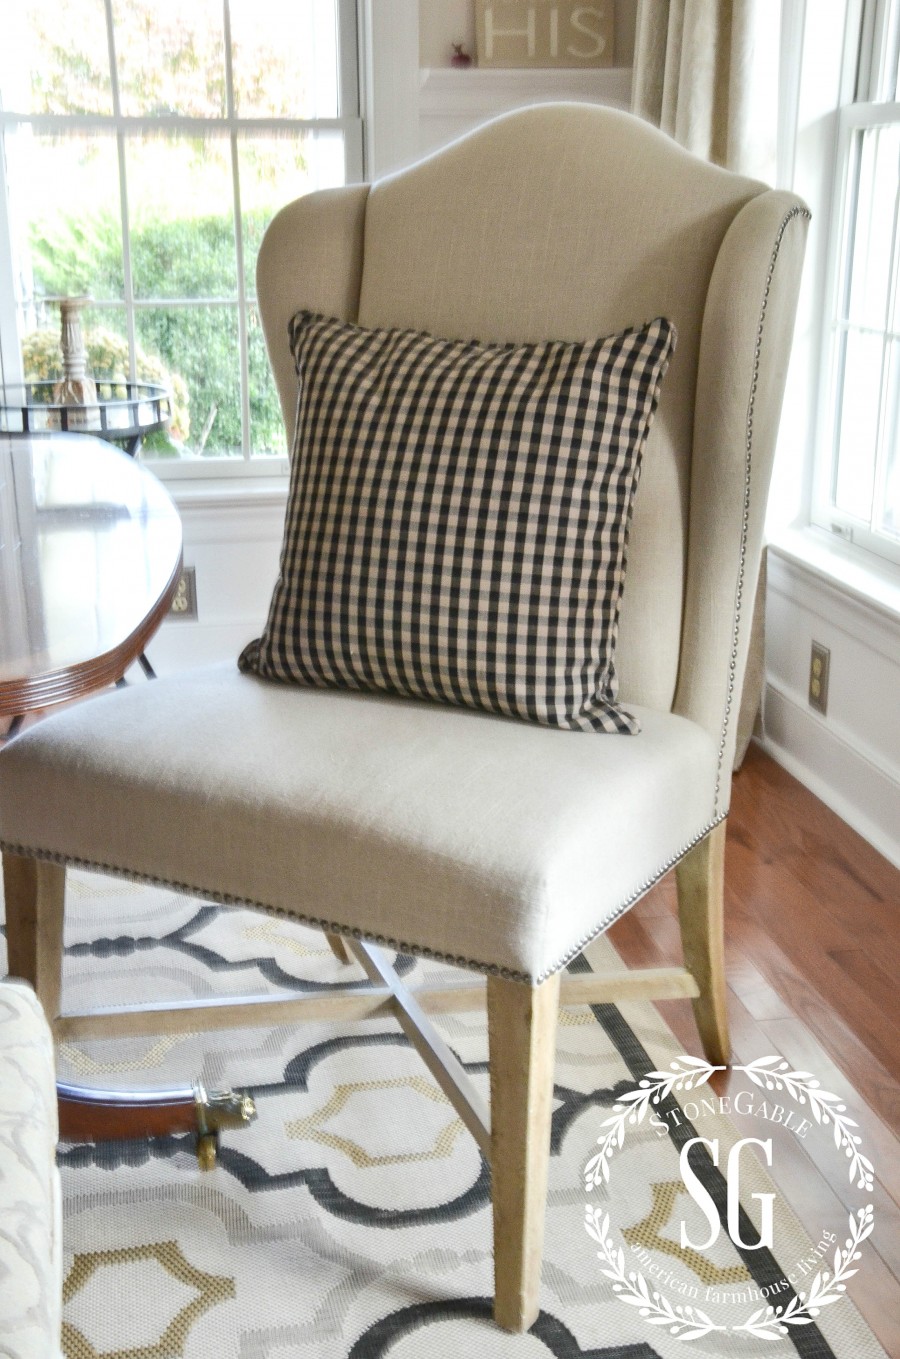 6 TIPS FOR CHOOSING THE PERFECT CHAIR. Good to know tips for finding the perfect chair for your home.